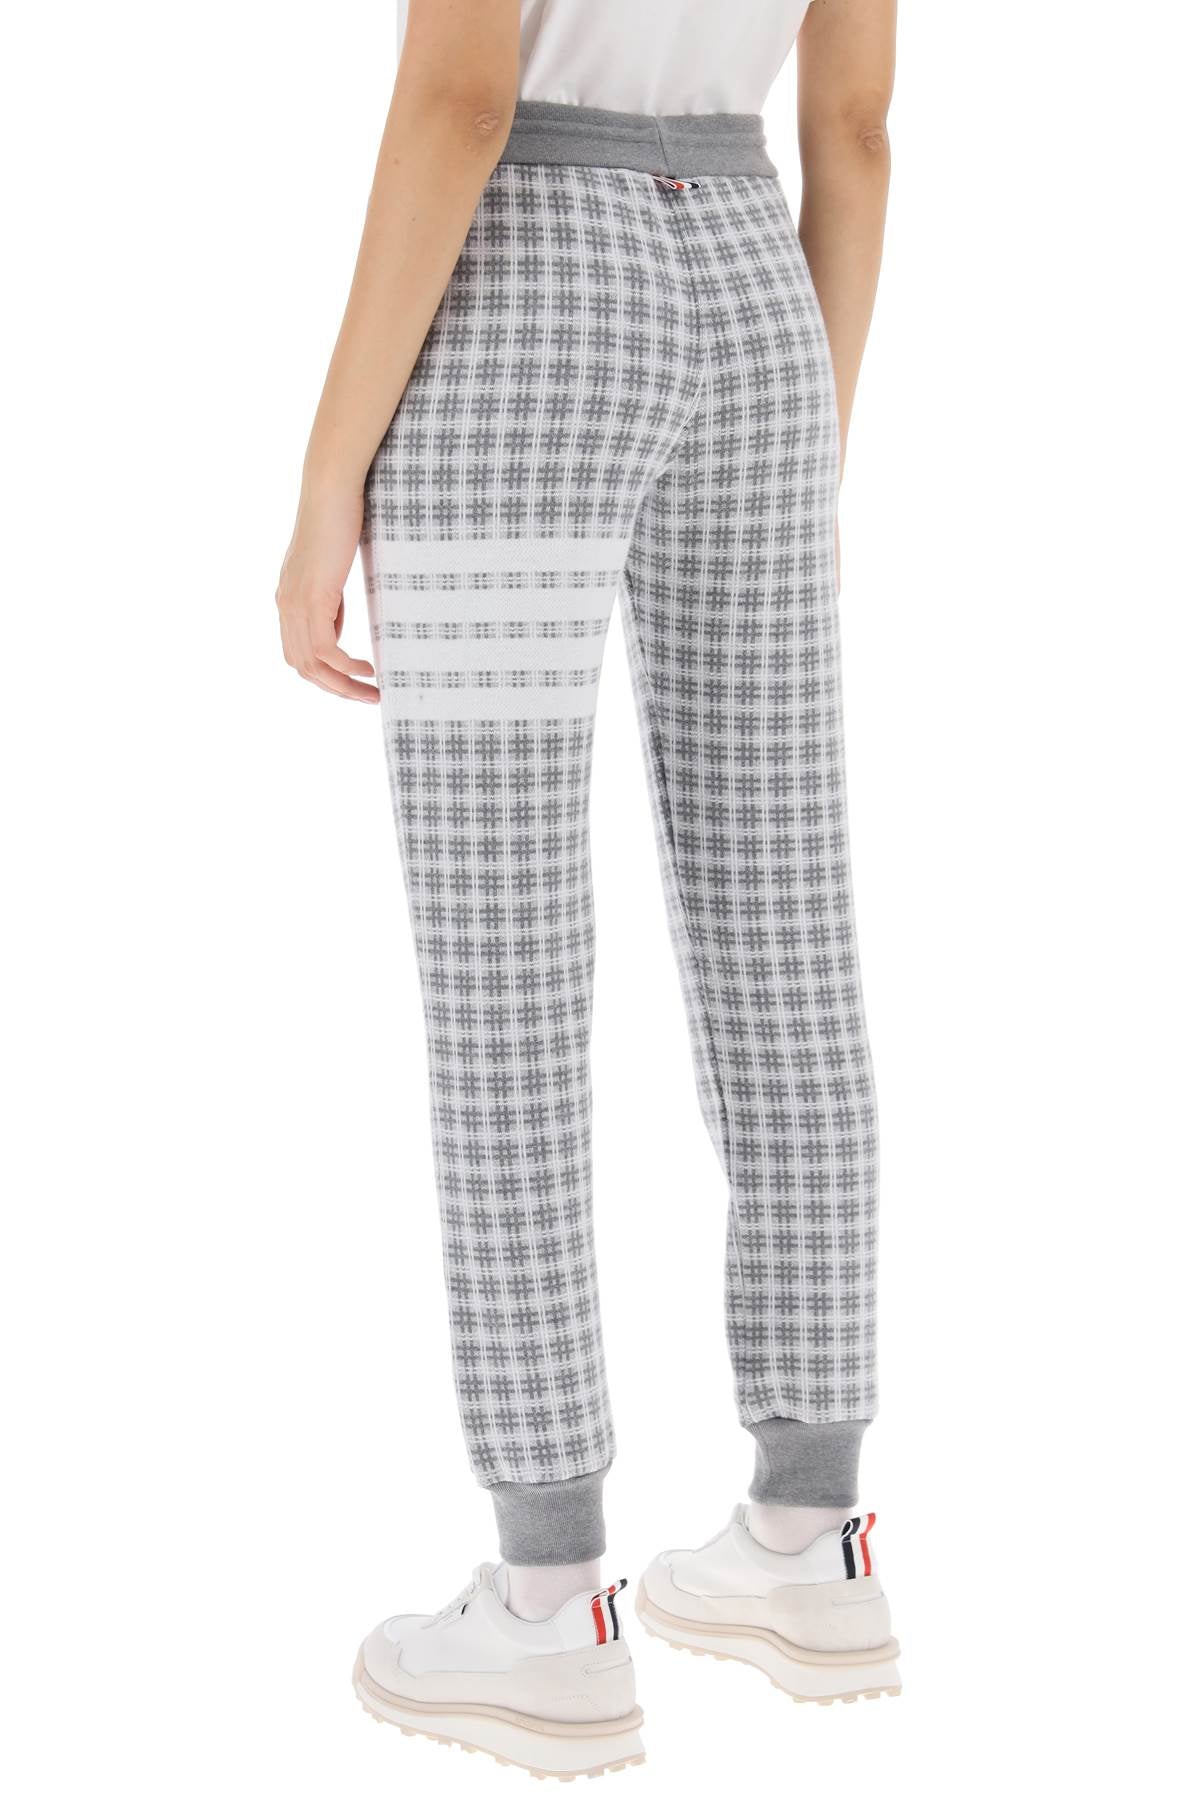 Thom browne 4-bar joggers in check knit-2